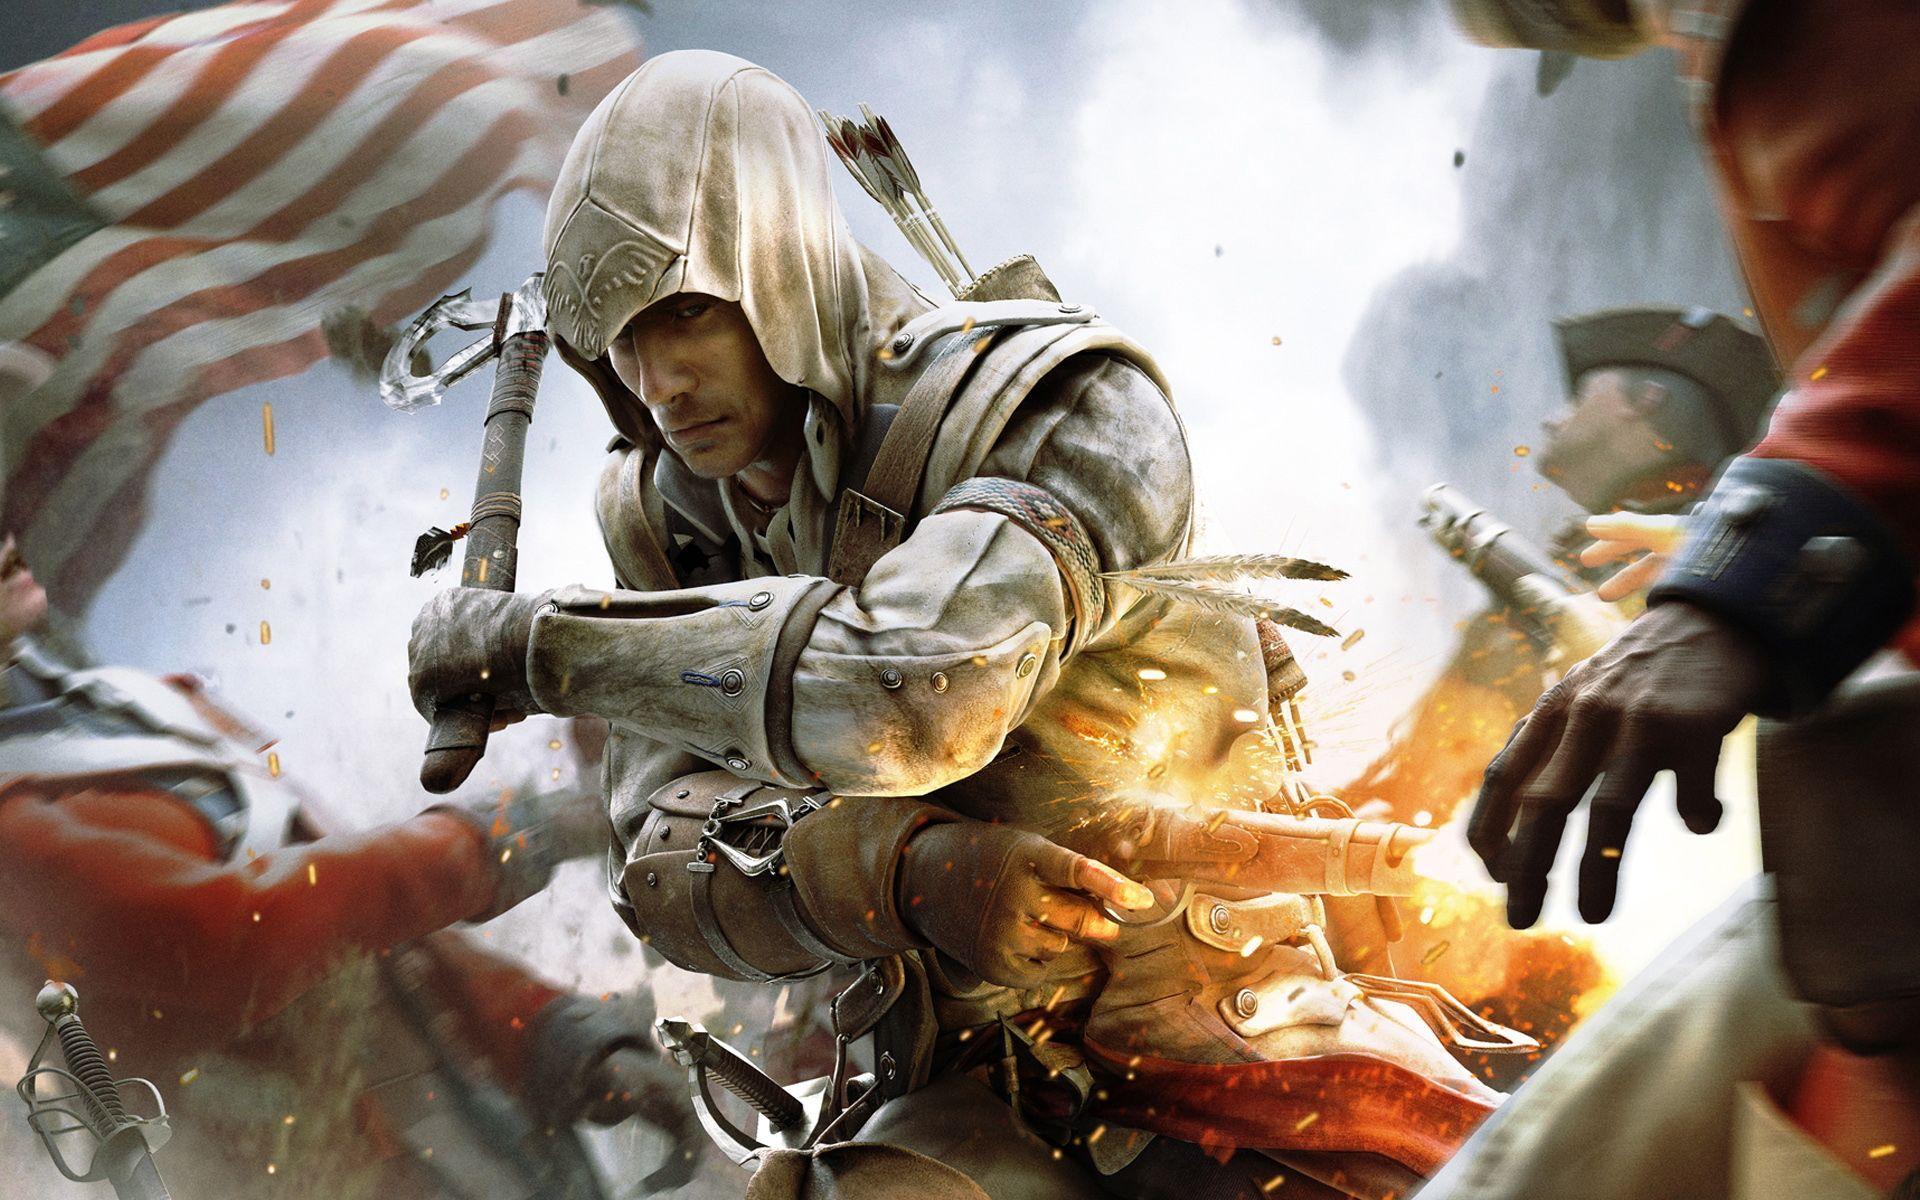 Assassins Creed 3 Wallpapers  HD Wallpapers  ID 11083